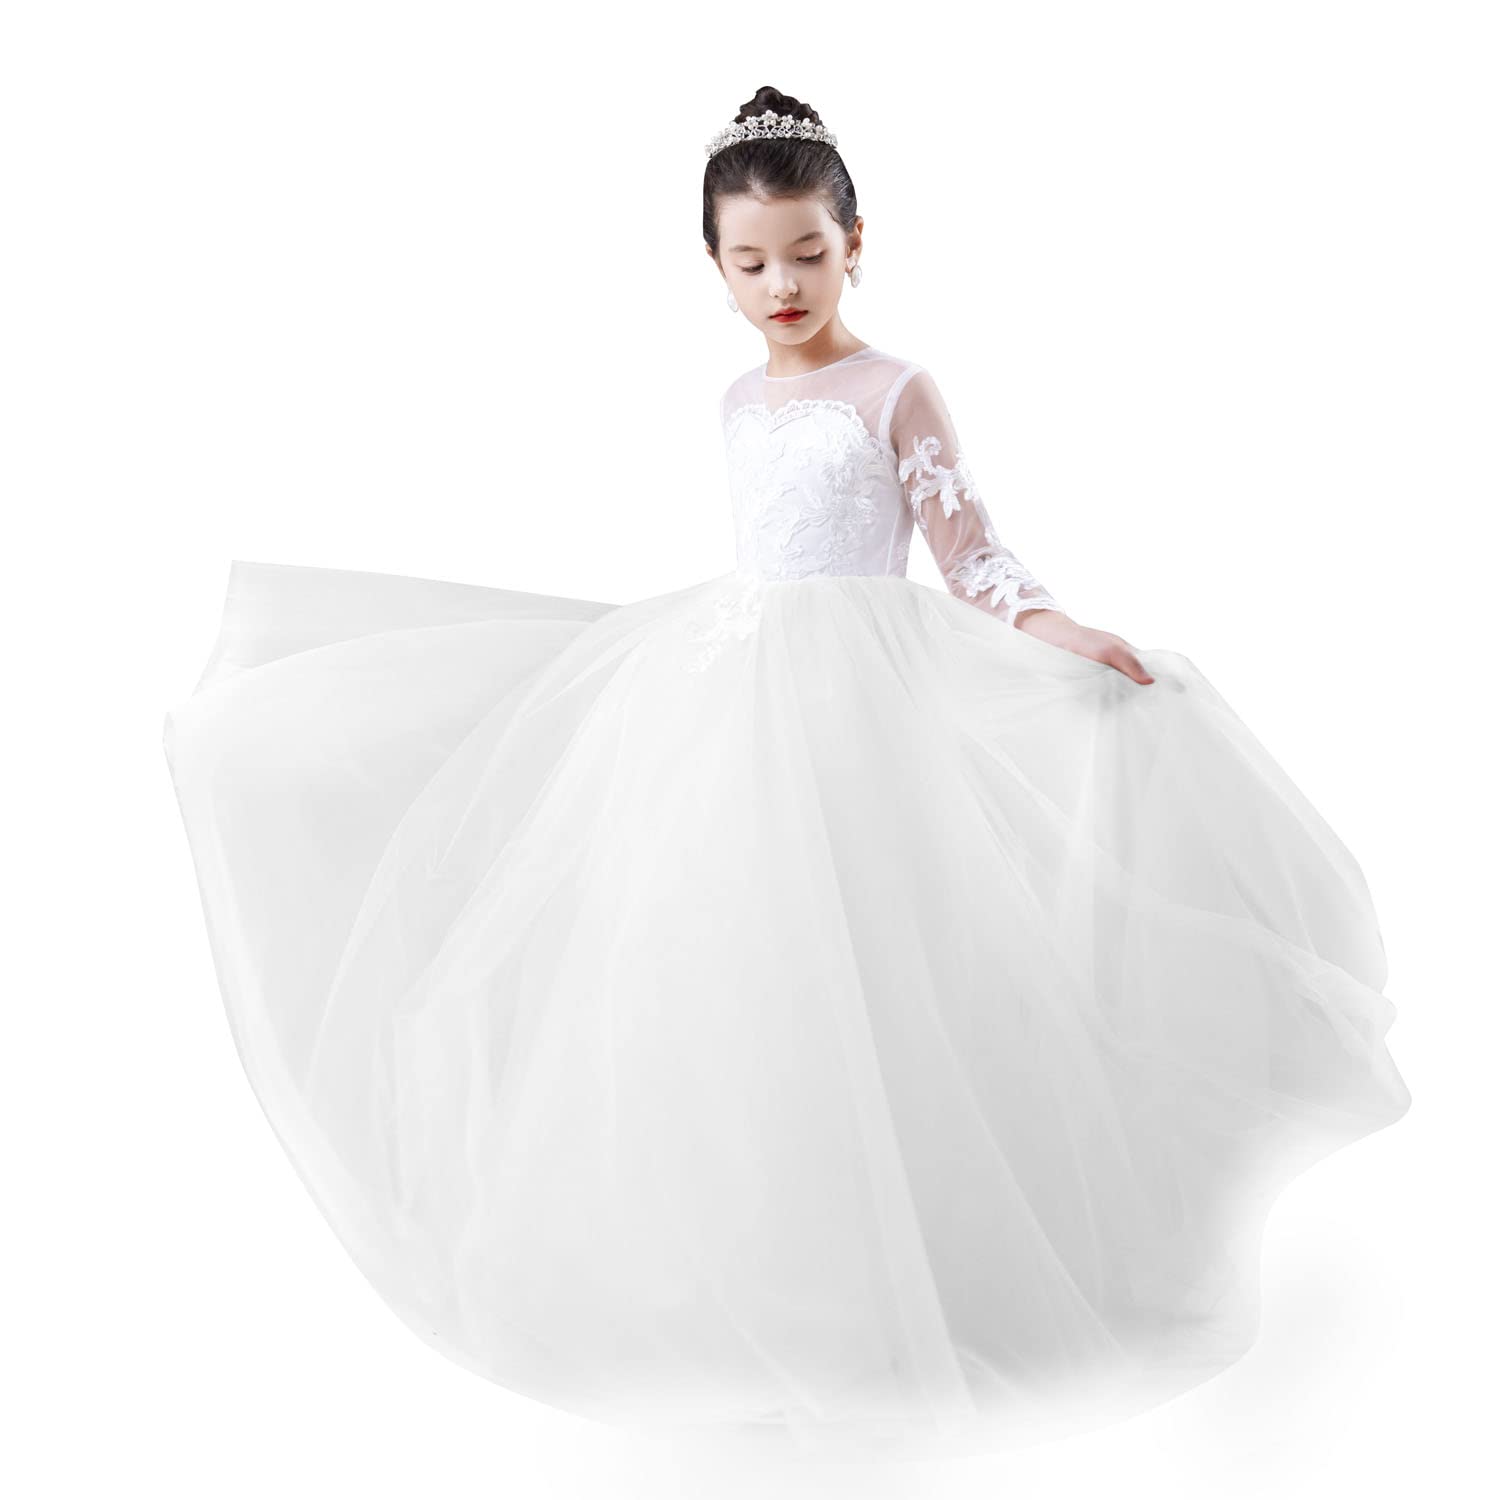 GZY White Ivory Lace Long Sleeve Flower Girl Dresses Princess Gown Pageant Dress GZY202